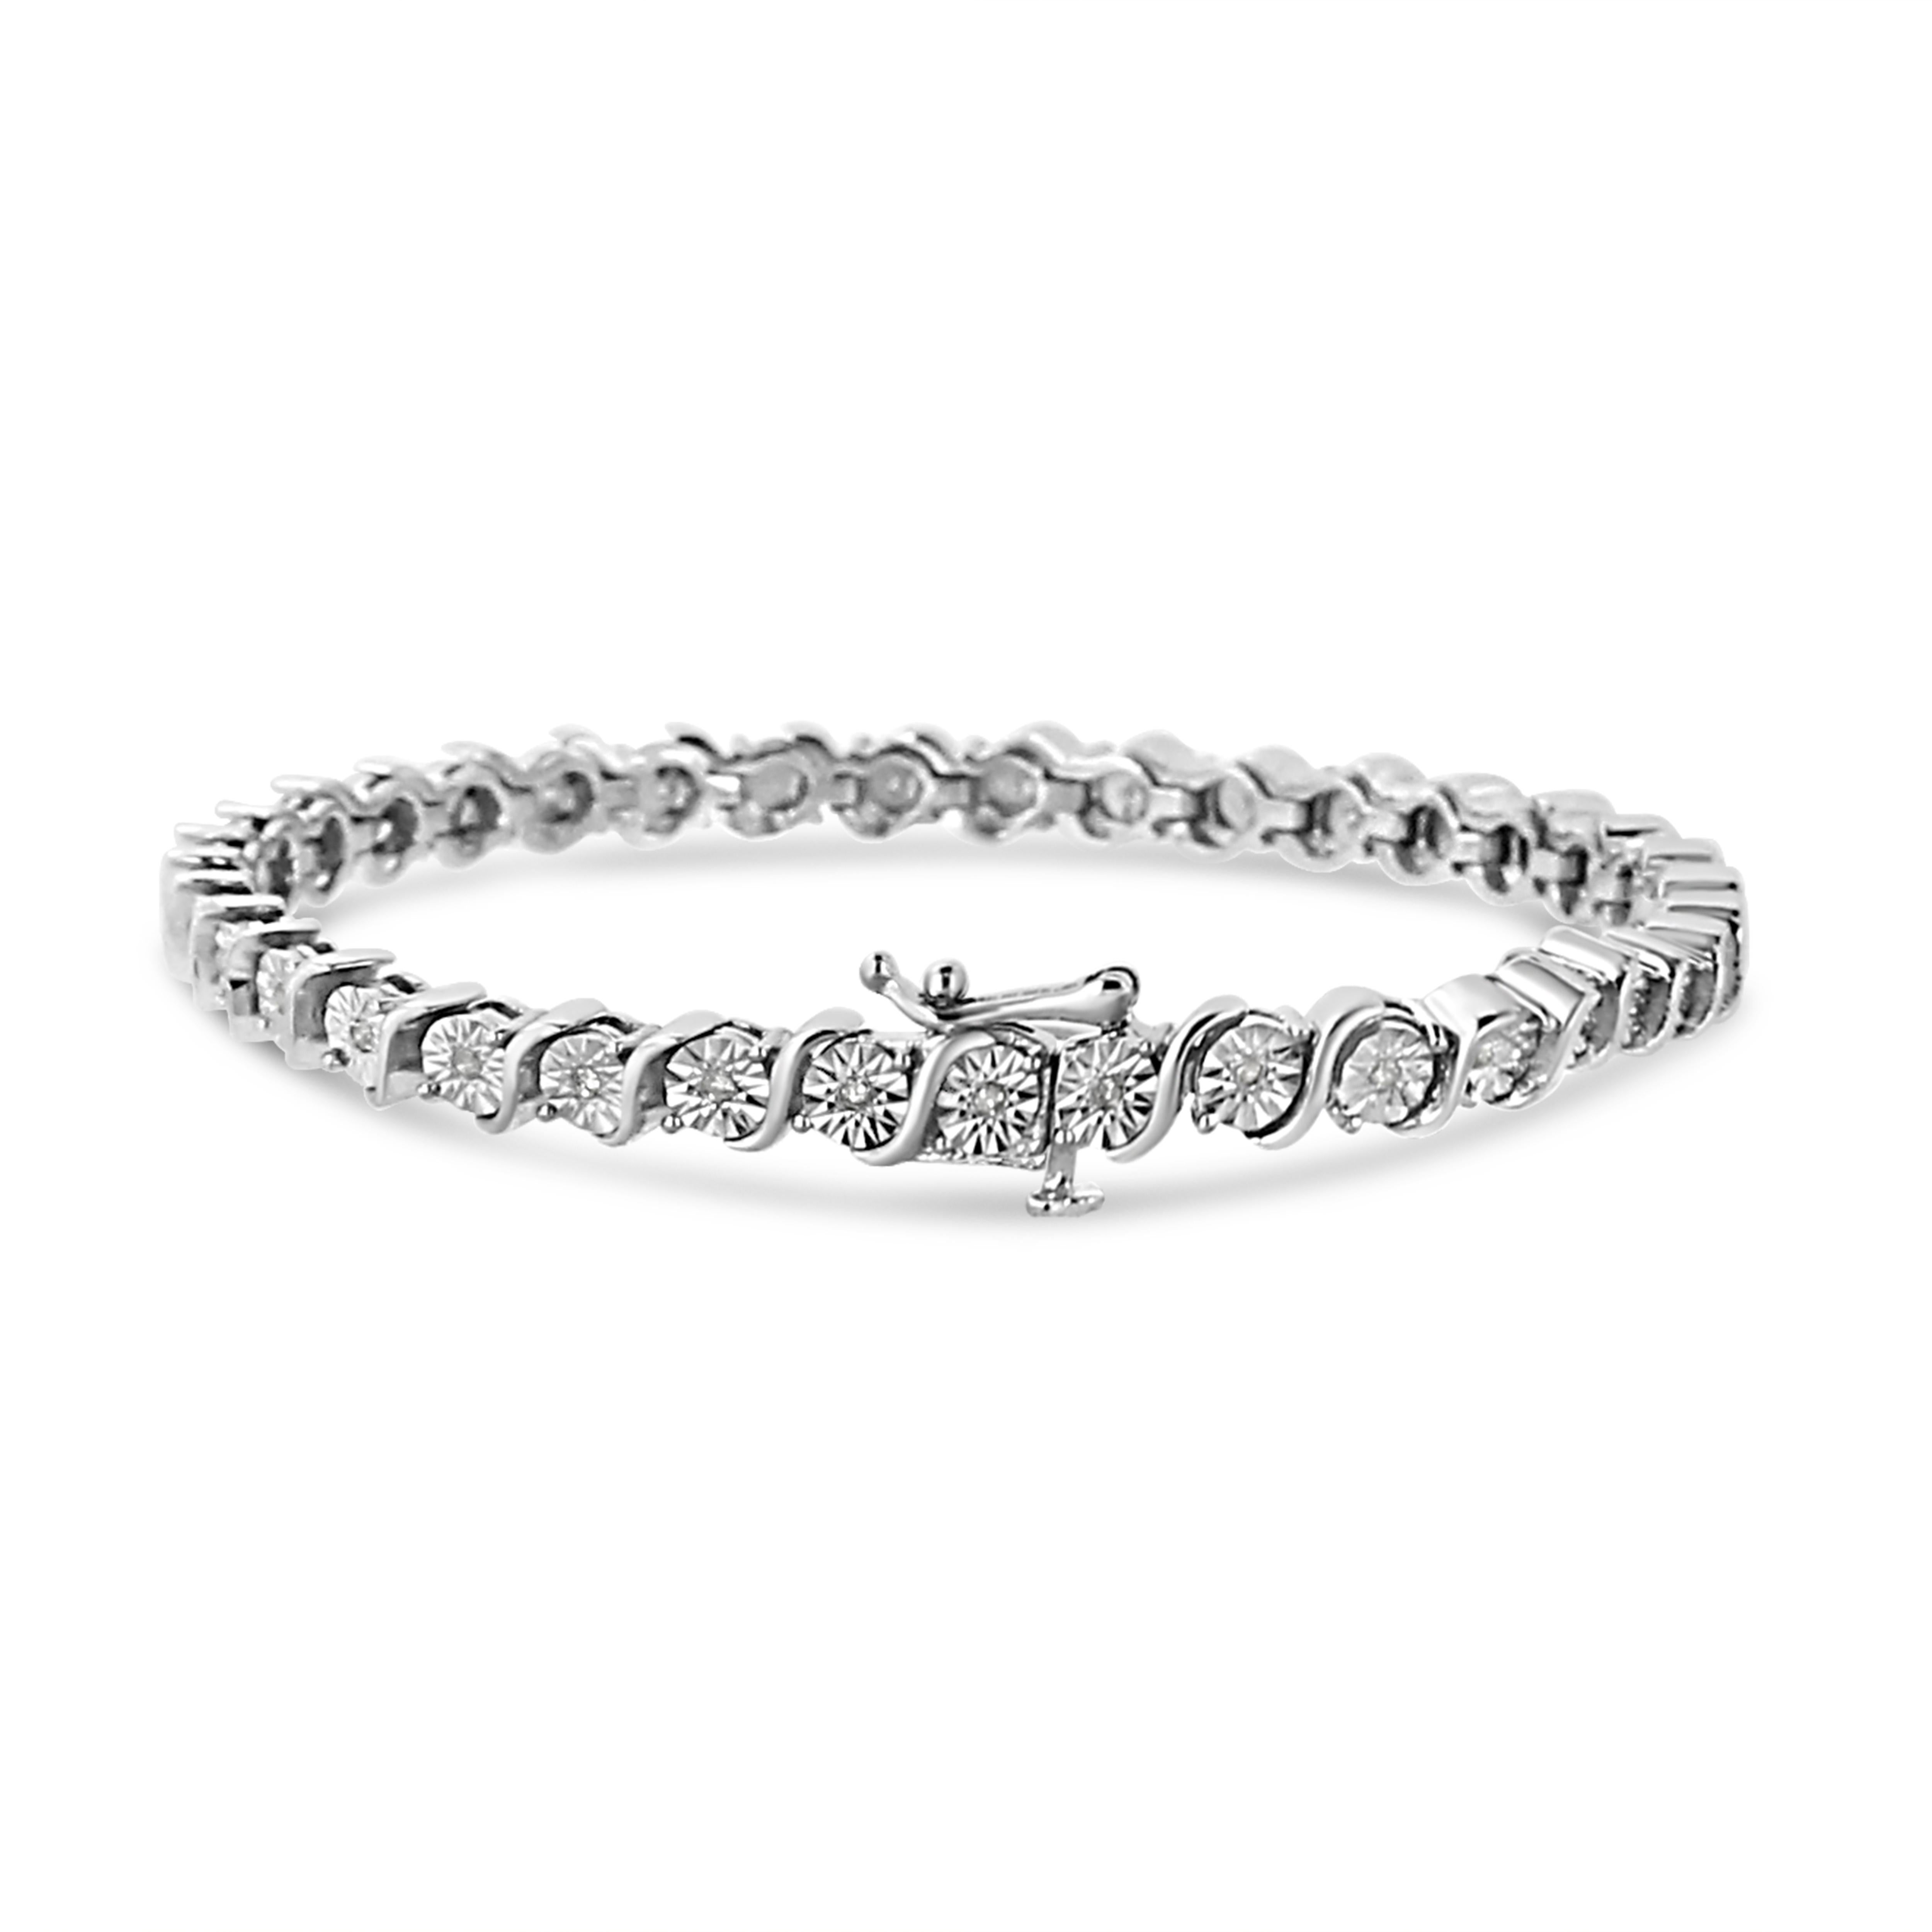 Elegant and timeless, this gorgeous 92.5% sterling silver tennis bracelet features 0.25 carat total weight of natural round brilliant cut white diamonds with 37 individual stones in all. The tennis bracelet has each diamond set into a faceted bezel